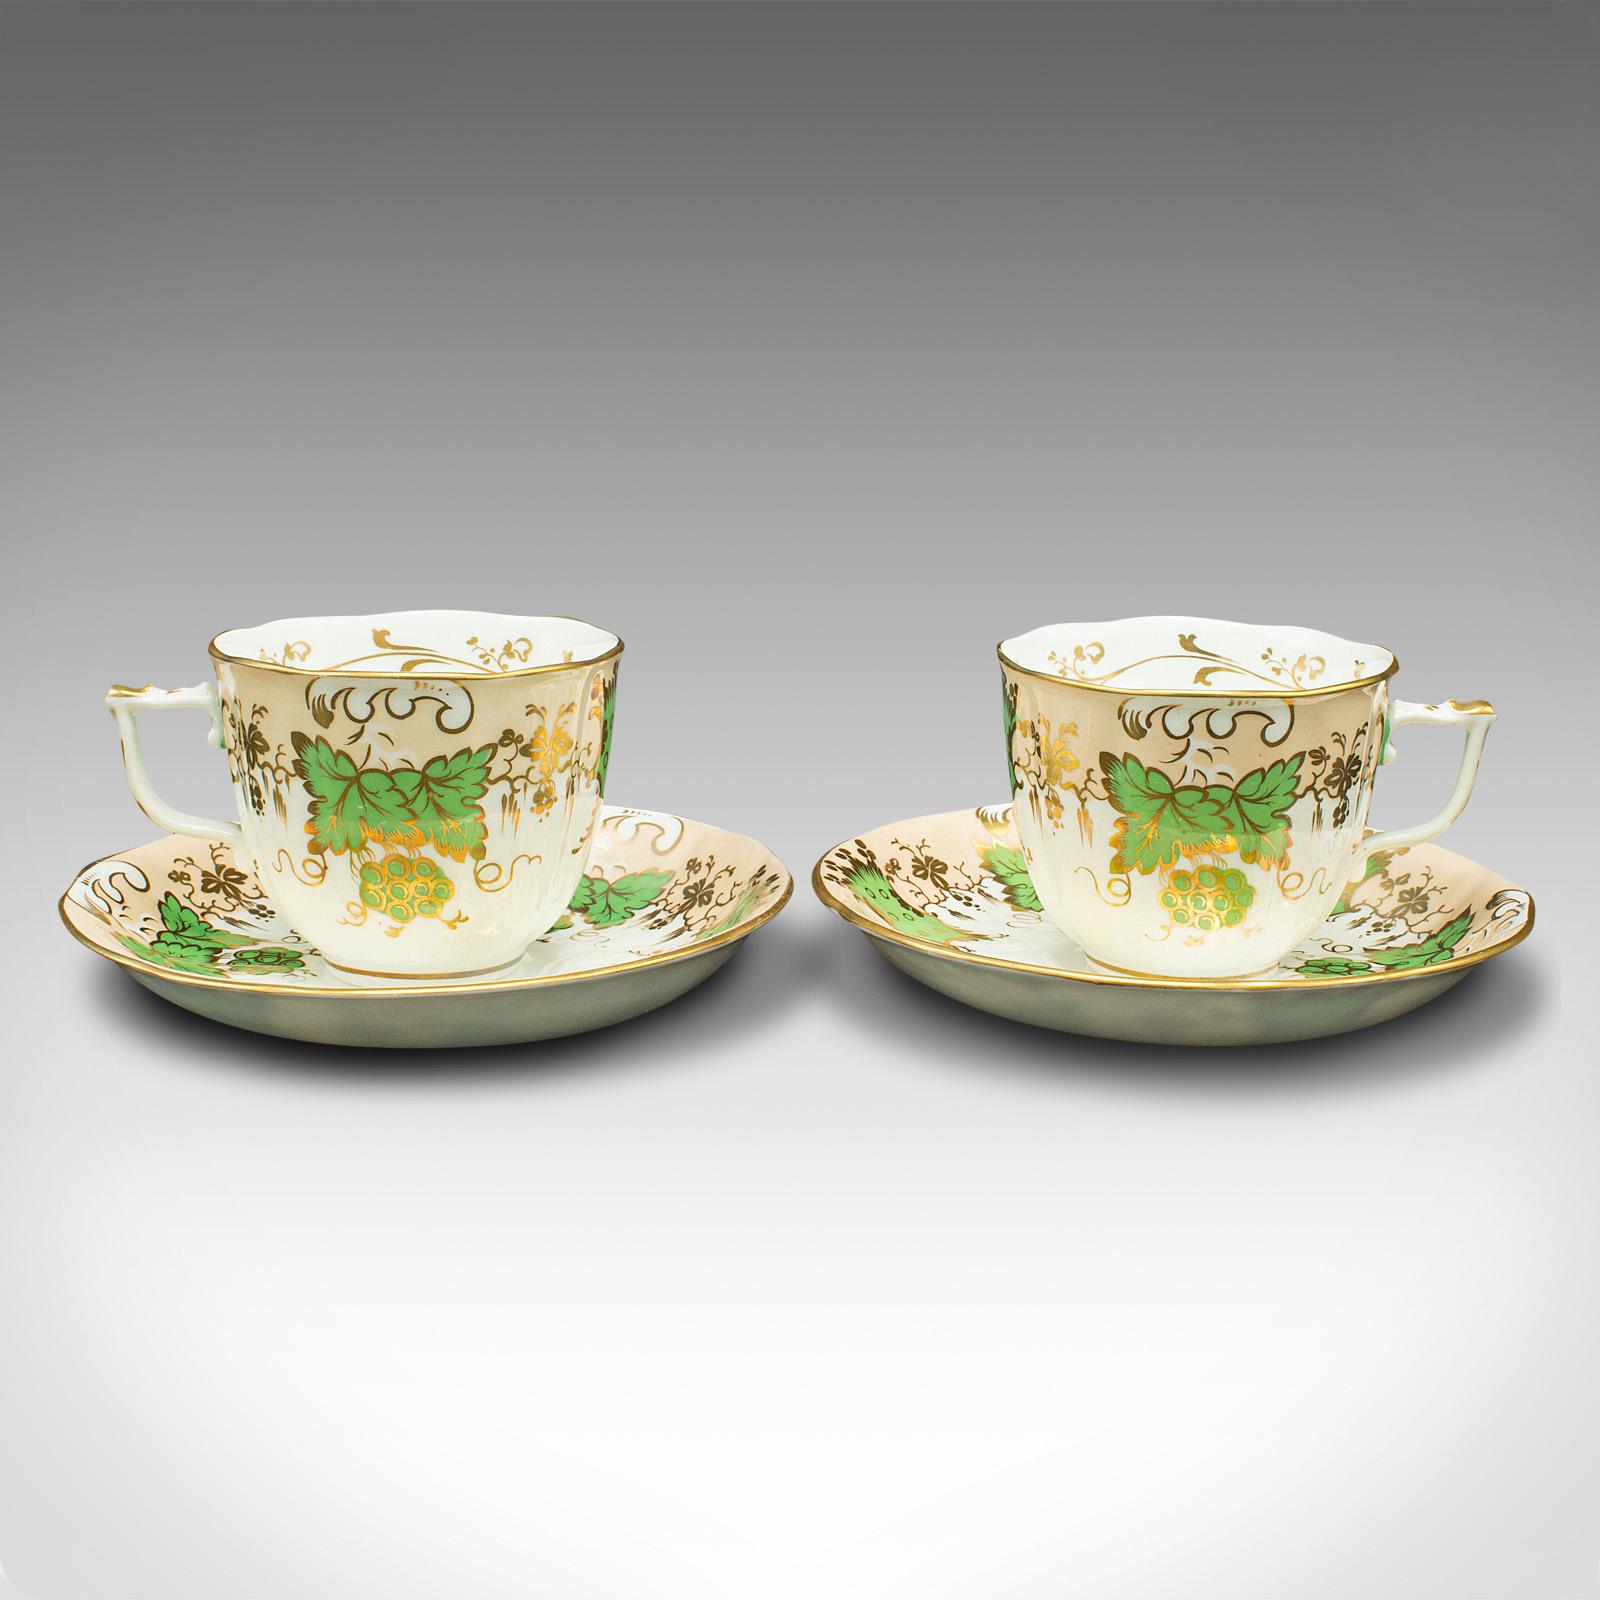 This is a set of 4 antique tea cups. An English, bone China decorative cup and saucer with green grape pattern, dating to the Victorian period, circa 1850.

A joy to hold, and beautifully decorated with Victorian appeal
Displaying a desirable aged